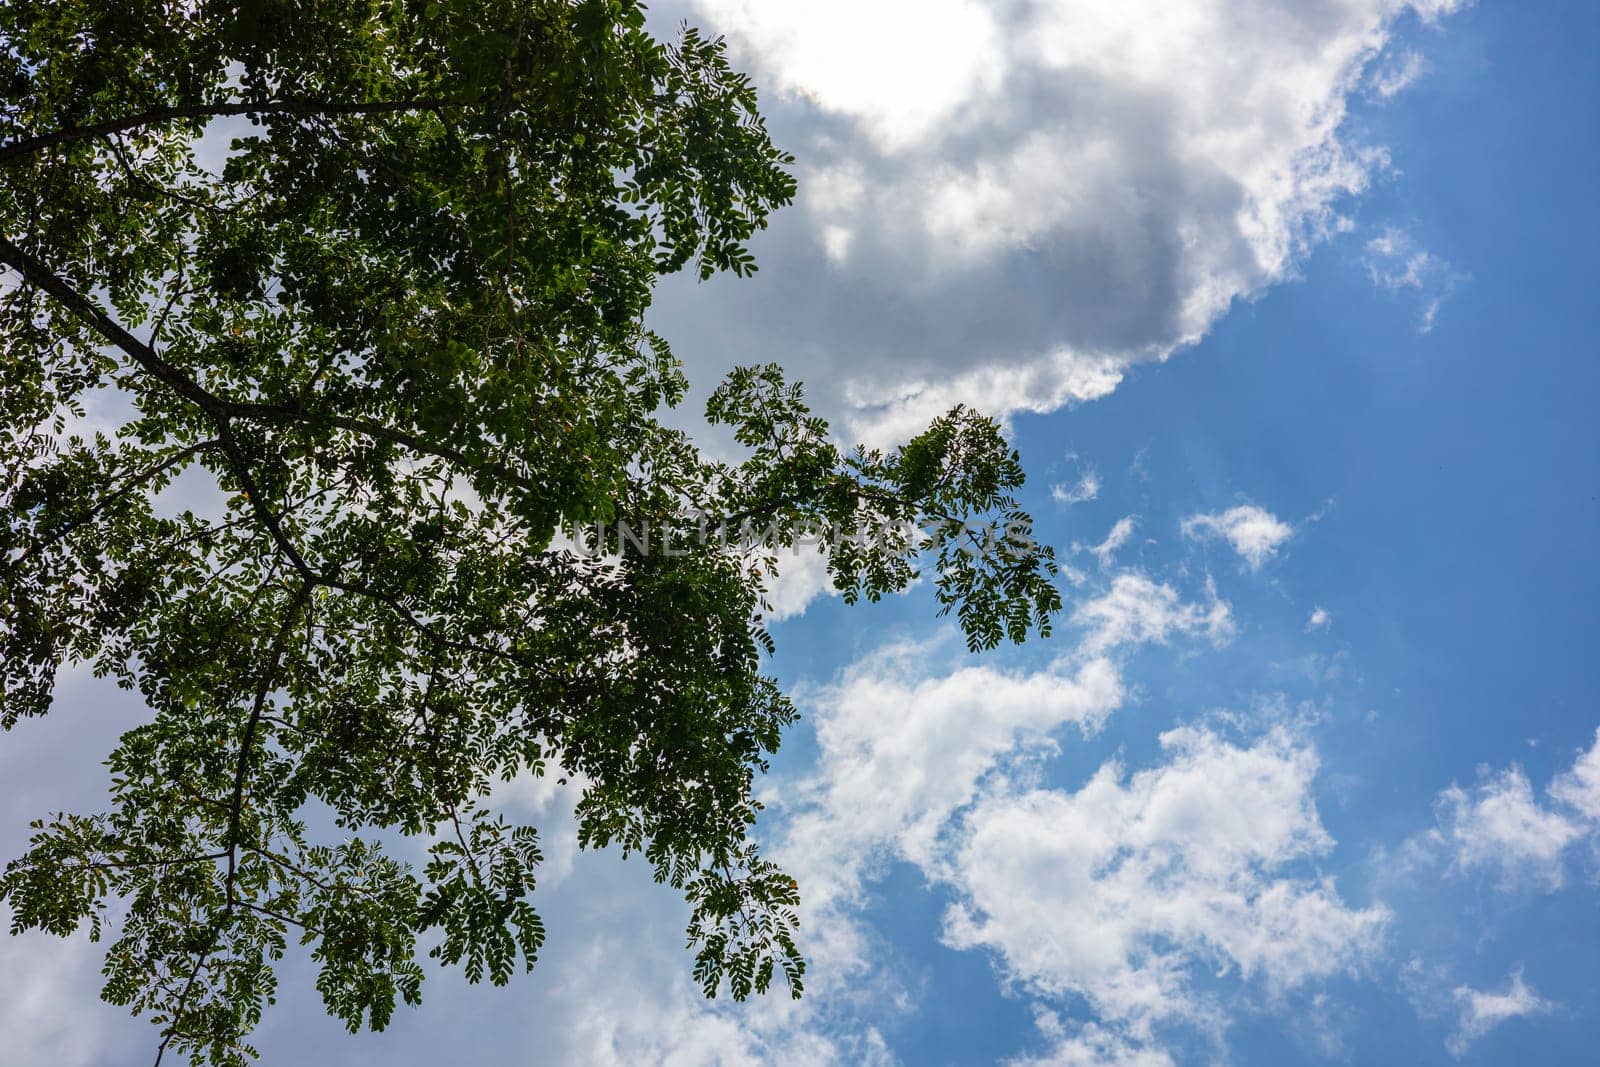 Green leaf of tree branch with blue sky and clouds.
